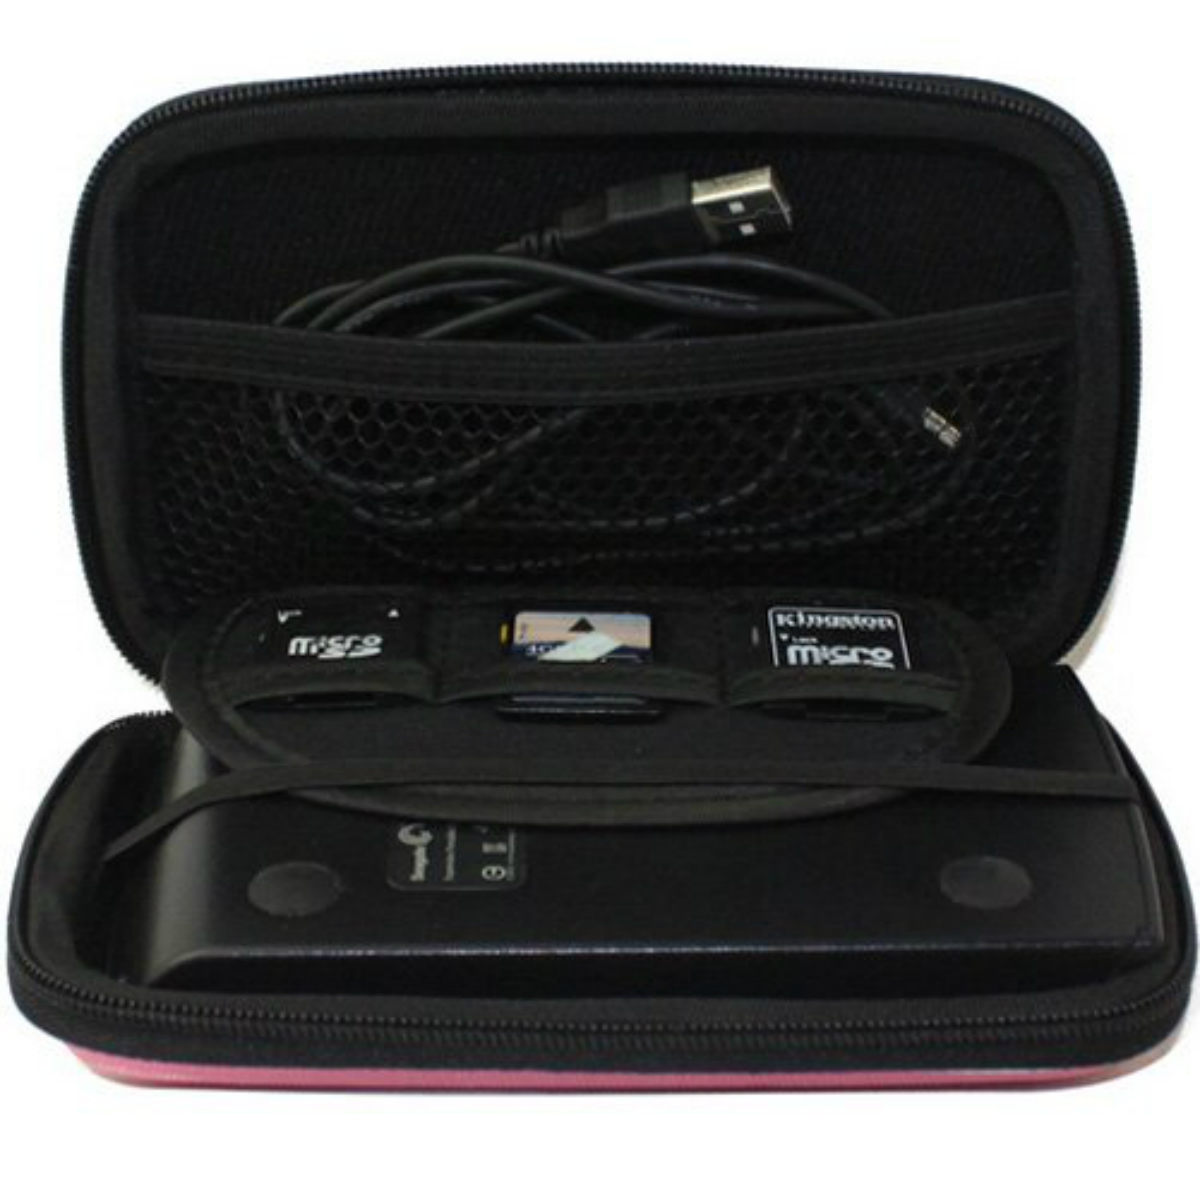 Portable-External-Hard-Drive-Disk-Pouch-Bag-HDD-Carry-Cover-USB-Cable-Storage-Case-Organizer-Bag-for-1633386-8